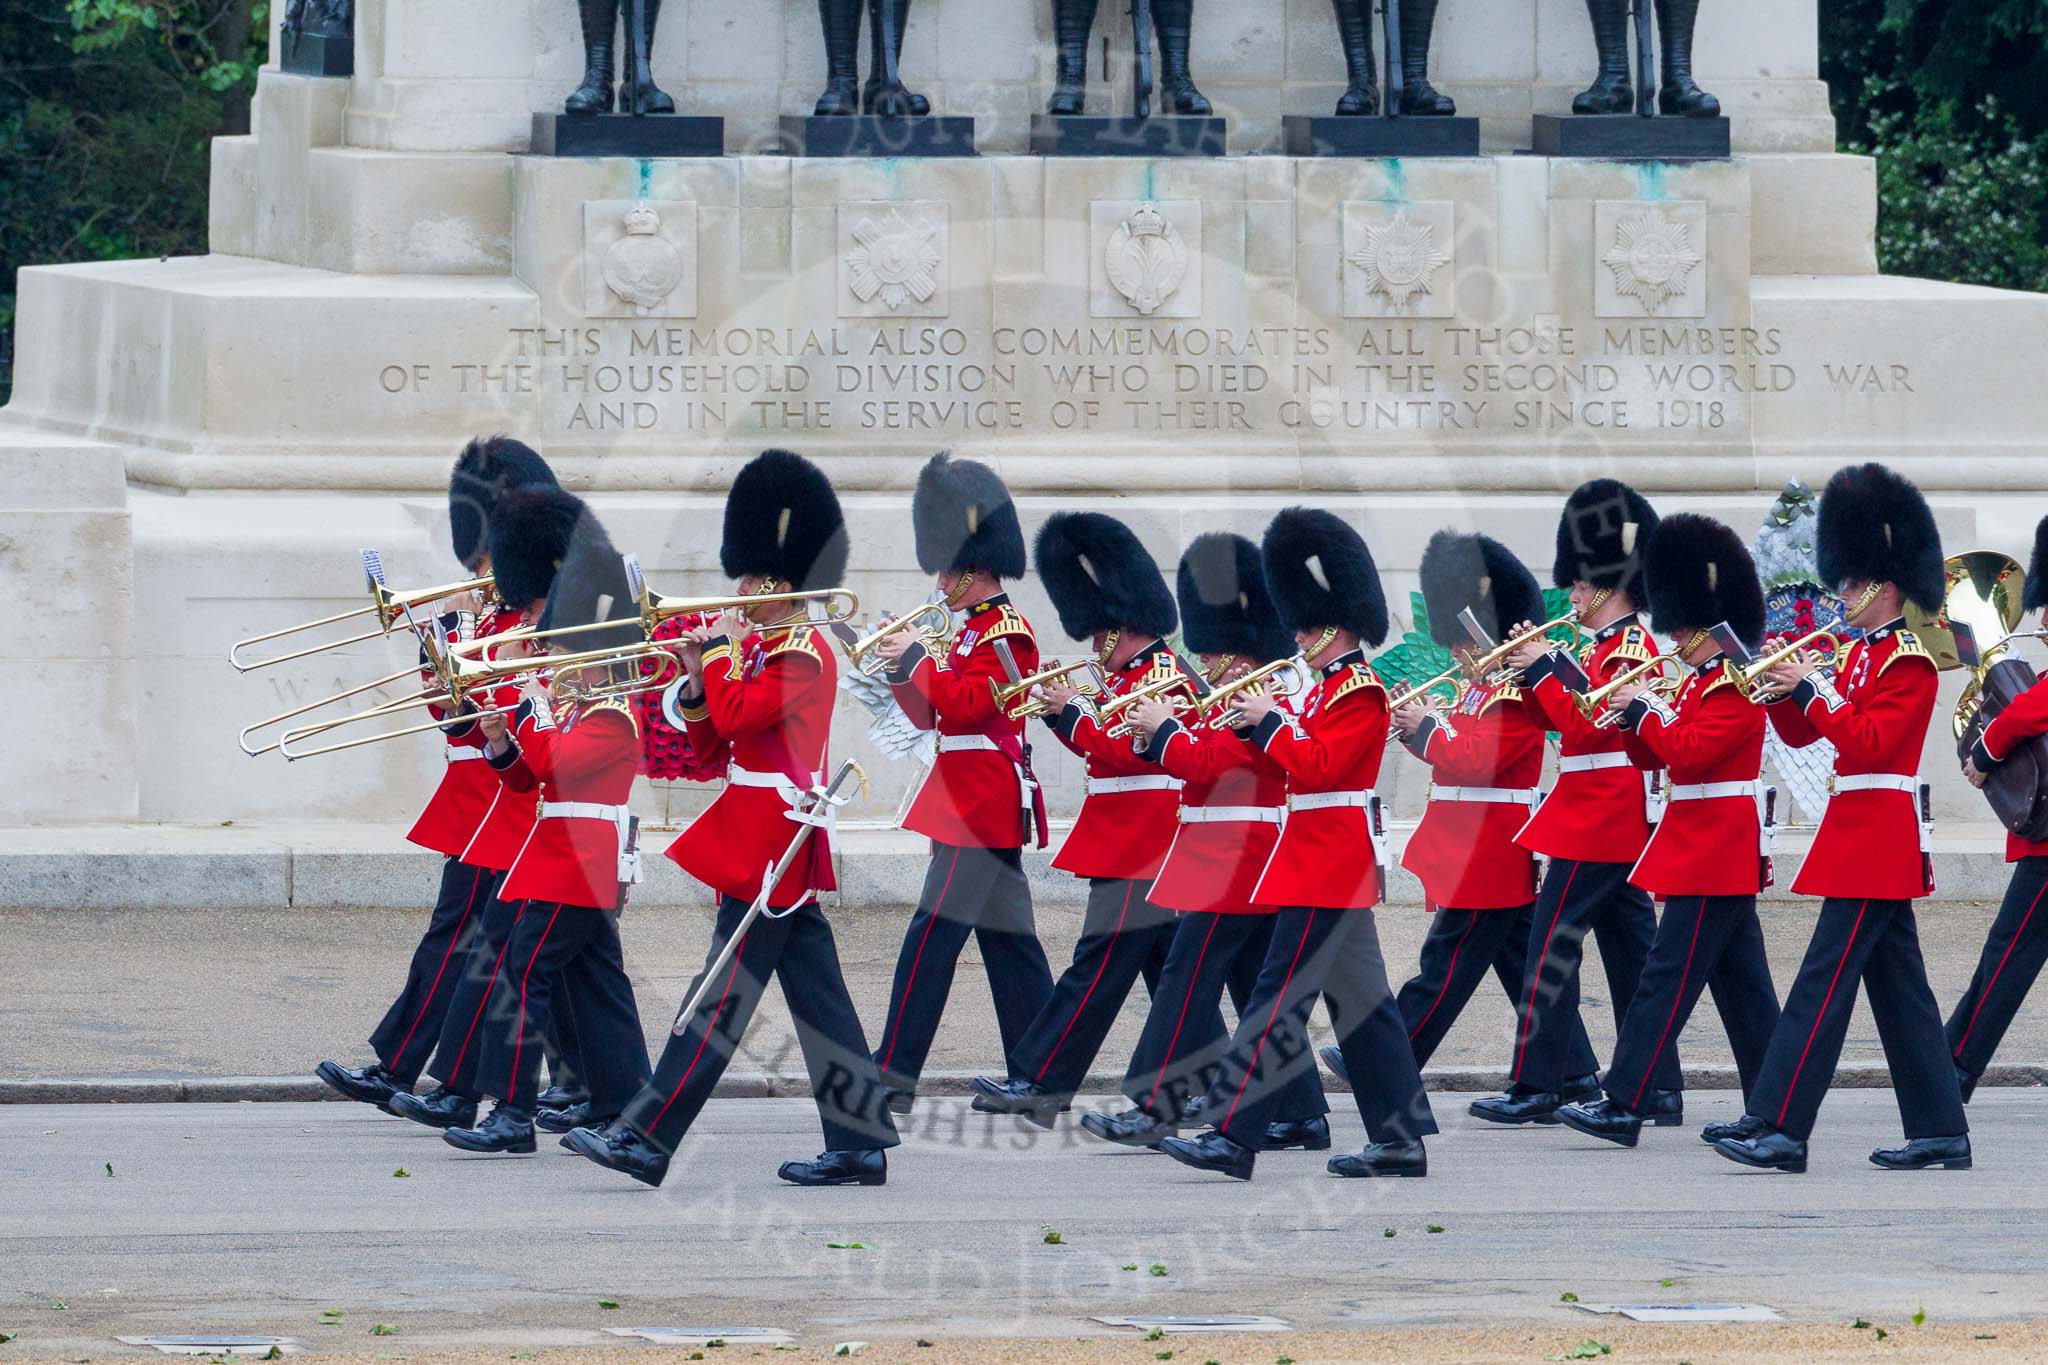 Trooping the Colour 2015. Image #99, 13 June 2015 10:28 Horse Guards Parade, London, UK